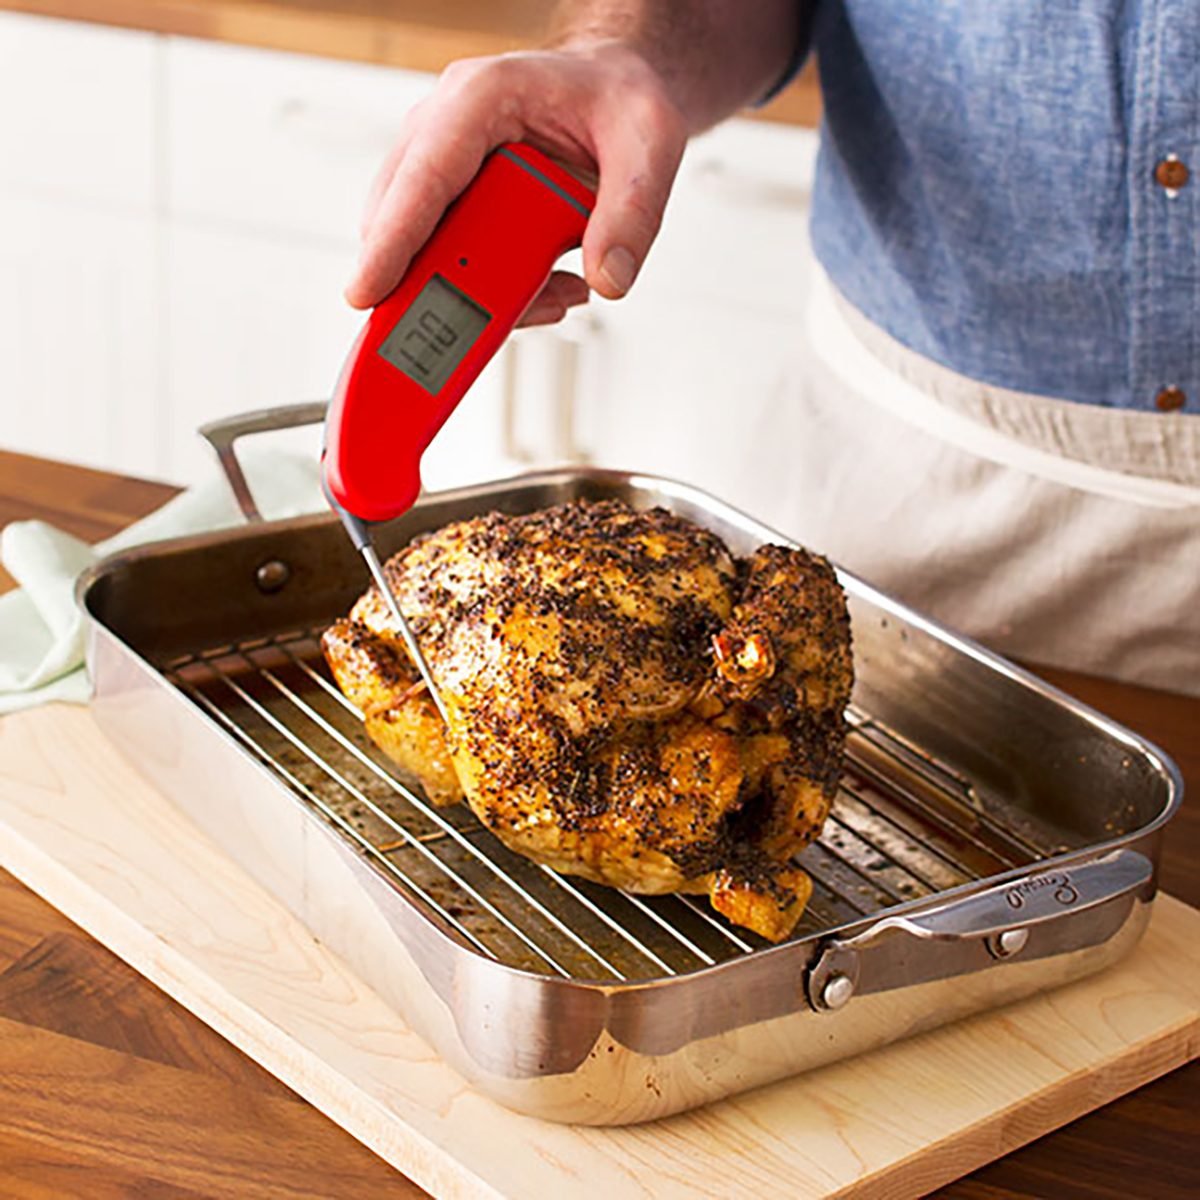 Baking Is Even Easier With A Meat Thermometer On Hand